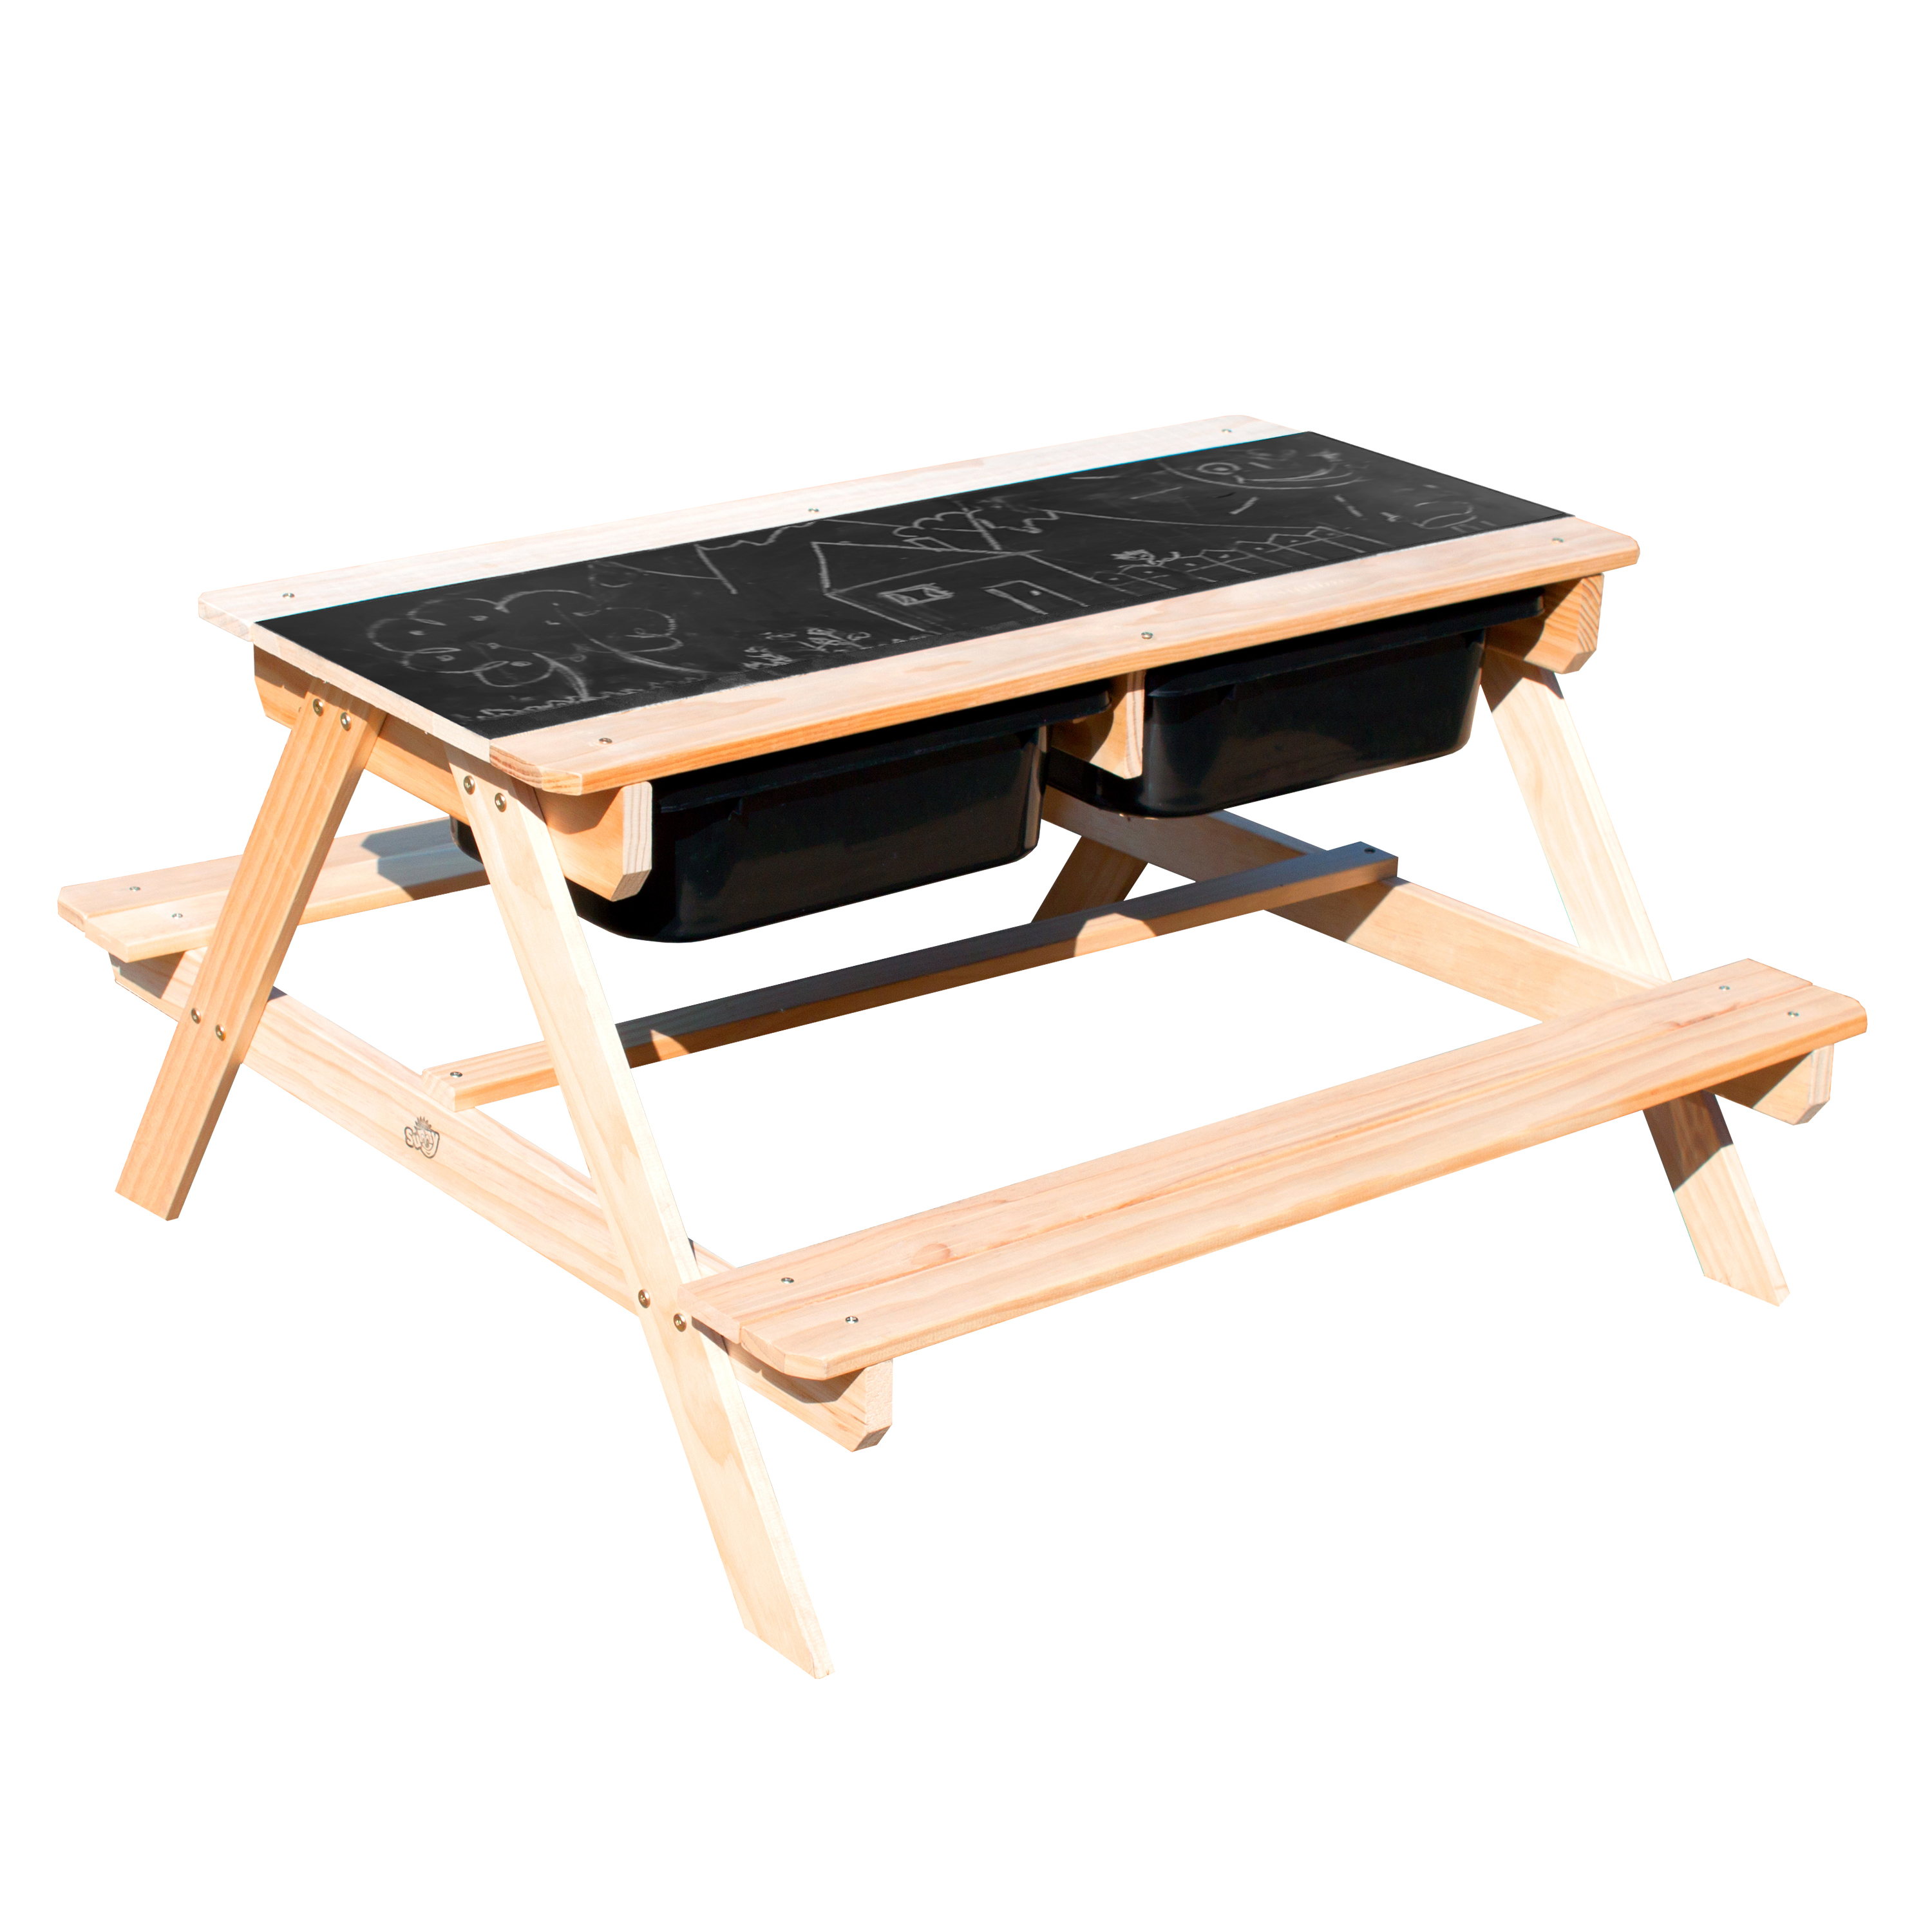 Dual Top 2.0 Sand & Water Picnic Table with Black Bins - Limited Edition